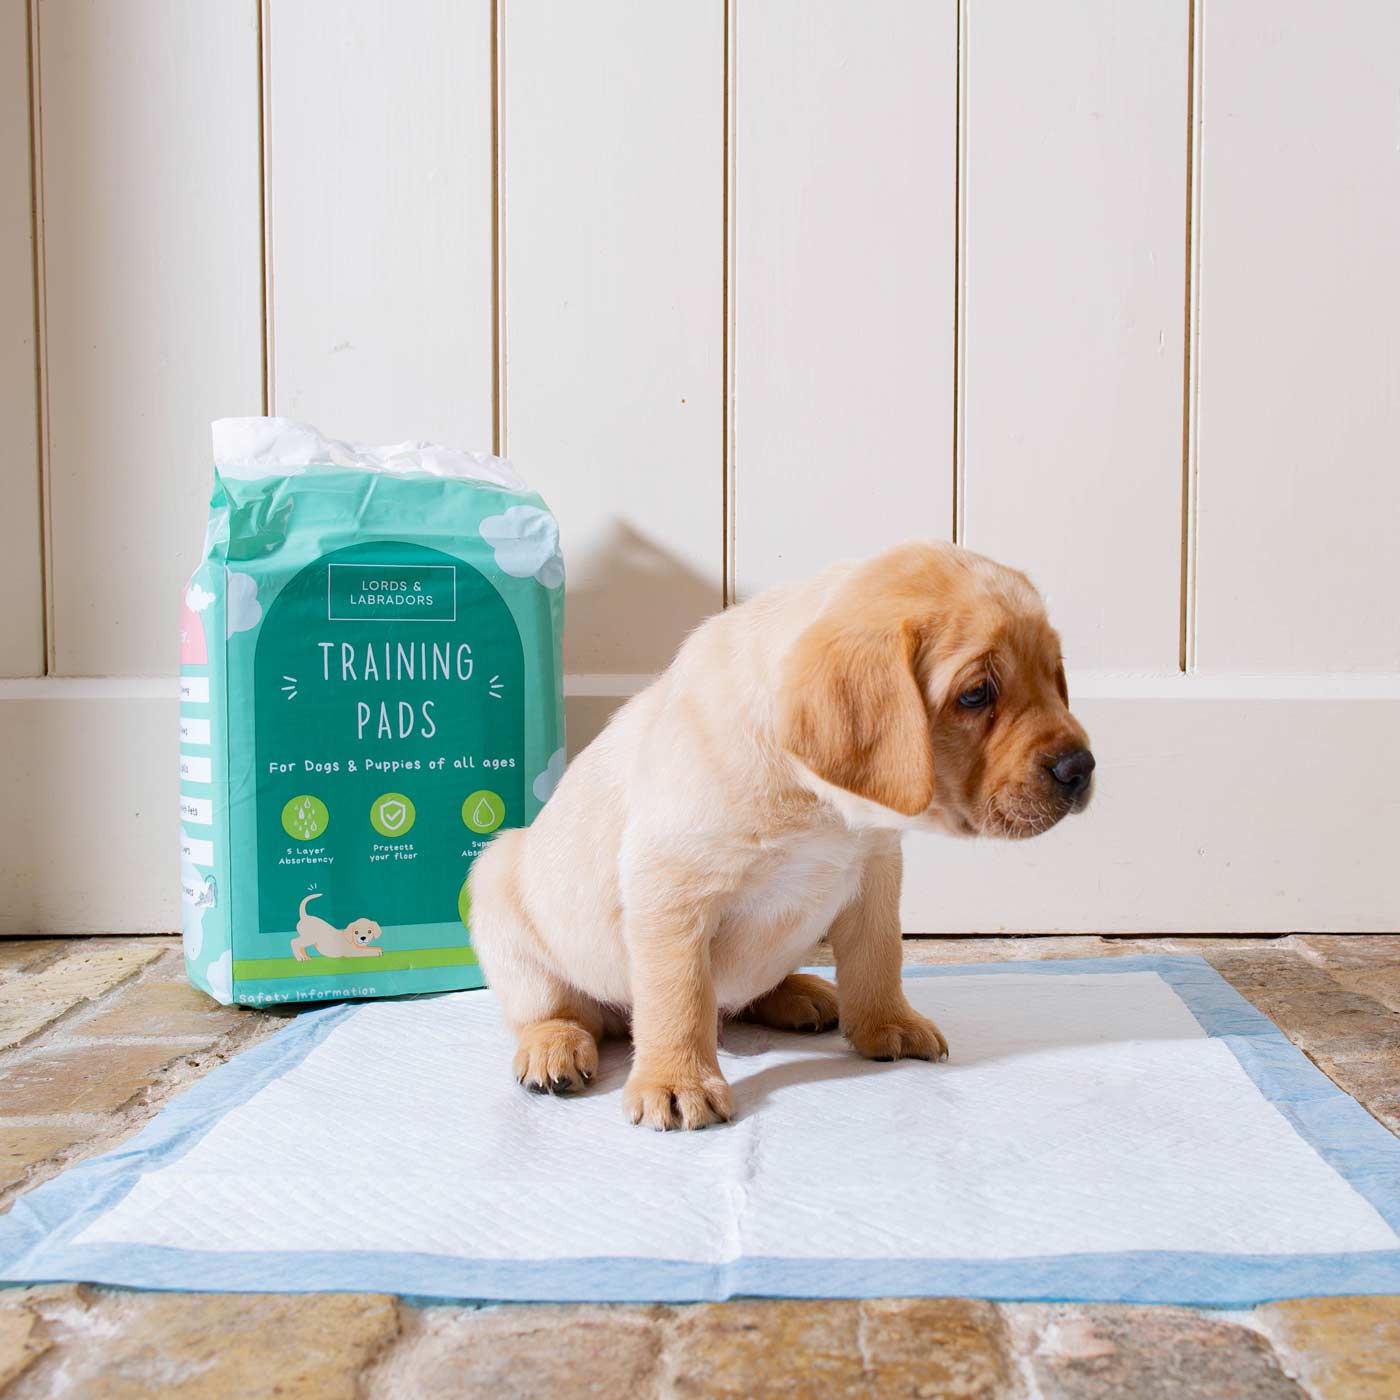 Discover Puppy Training Pads, 50 pads per pack. Featuring Super absorbent with 5 layers absorbency, and Makes house training easy and protects floors. Reducing smelly odours, Perfect for training puppies, travelling, ill or confined dogs. now available at Lords and Labradors